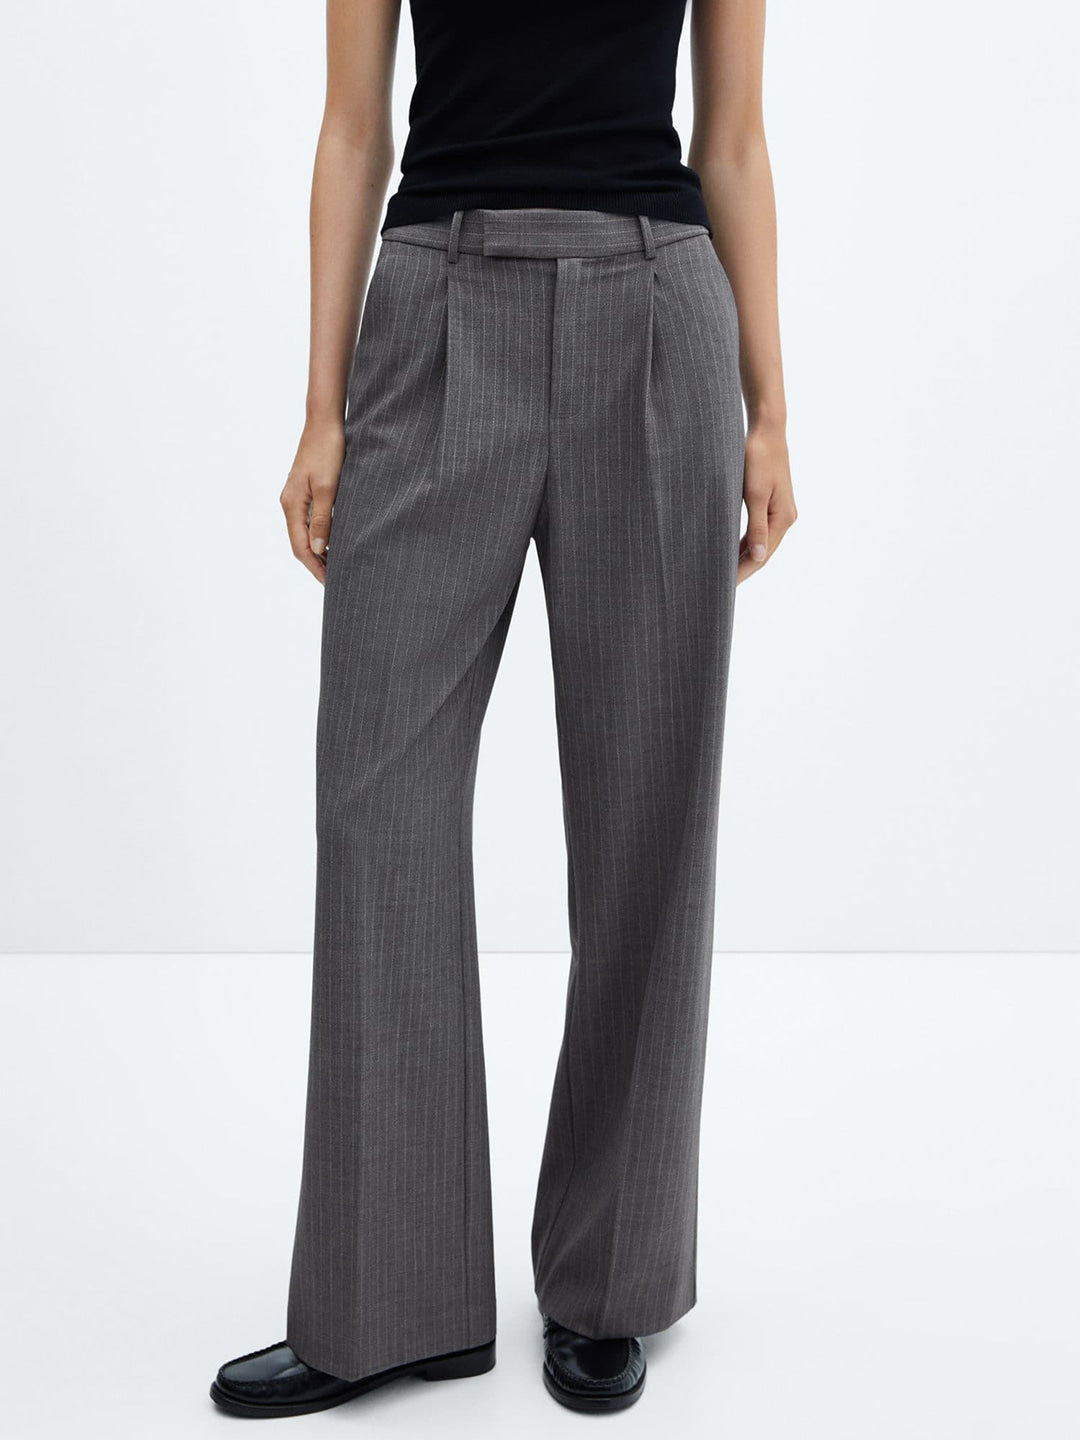 Men's Pleated Trousers with Self-Belt - Unhemmed |